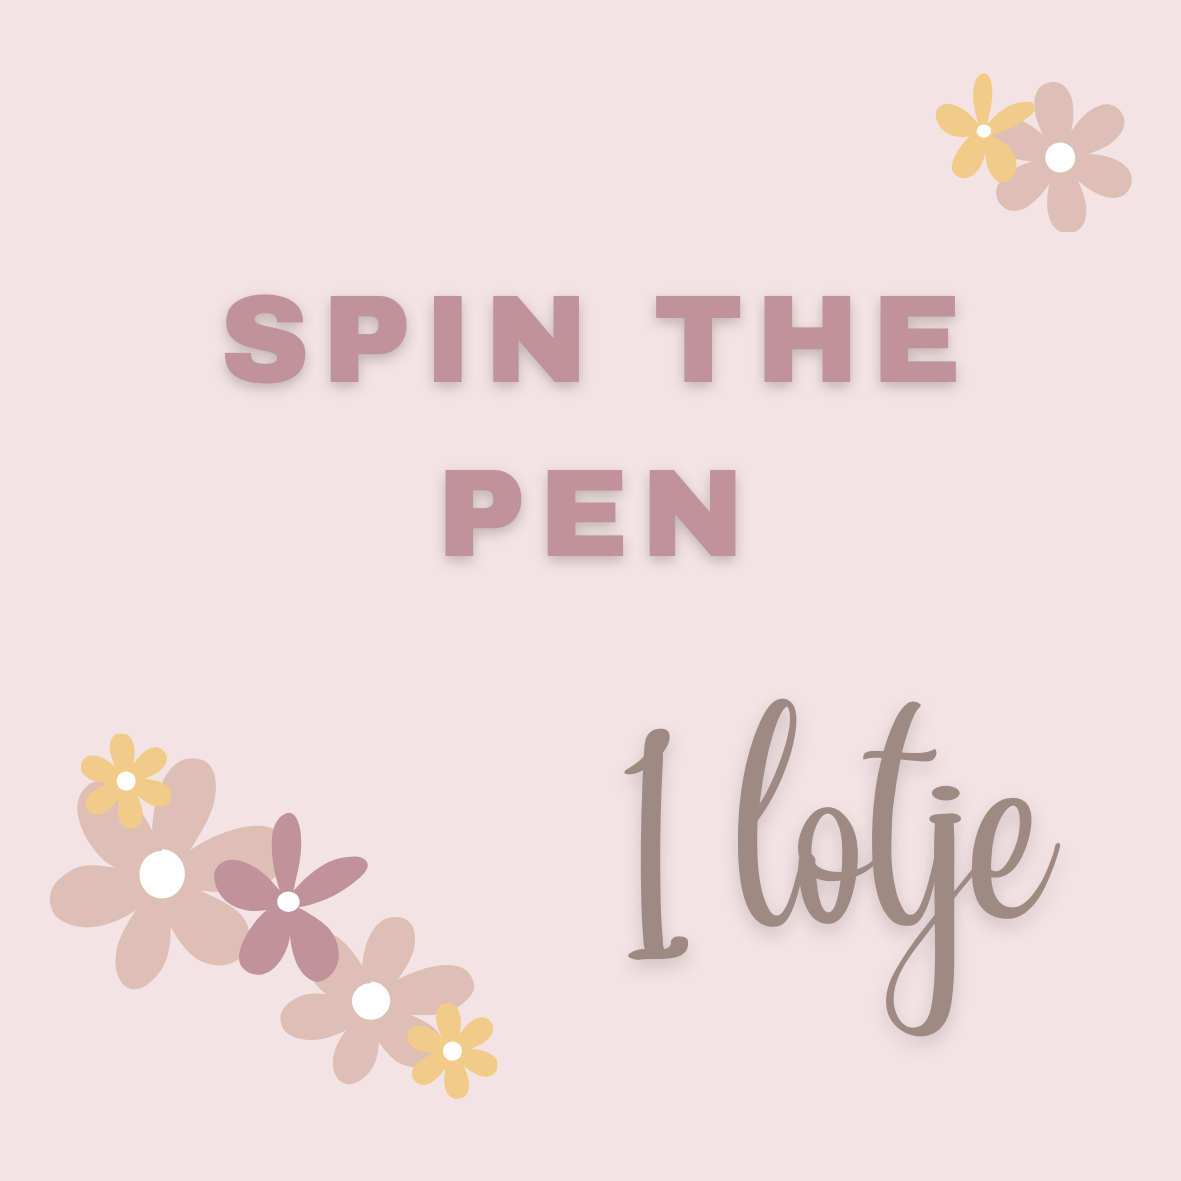 SPIN THE PEN - LOTJE